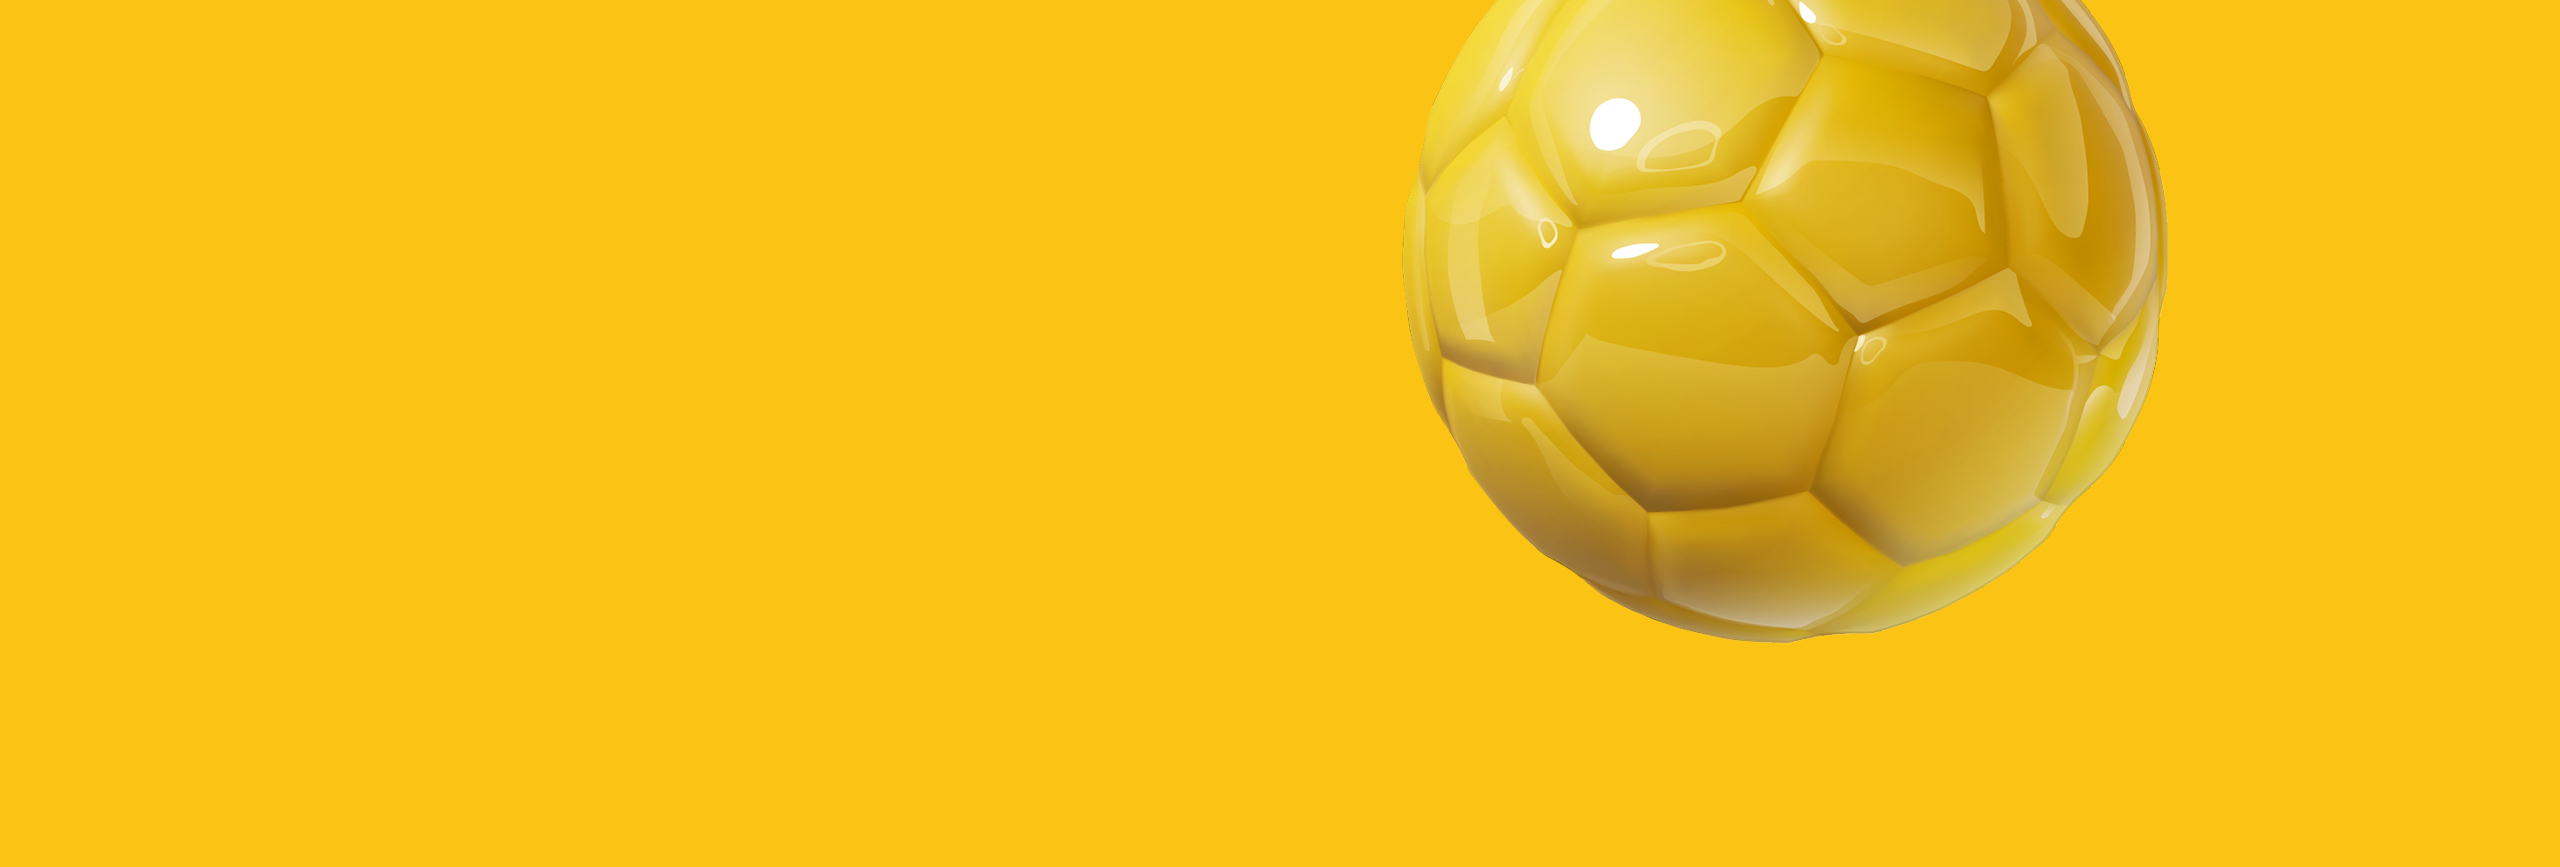 Gold background with gold soccer ball